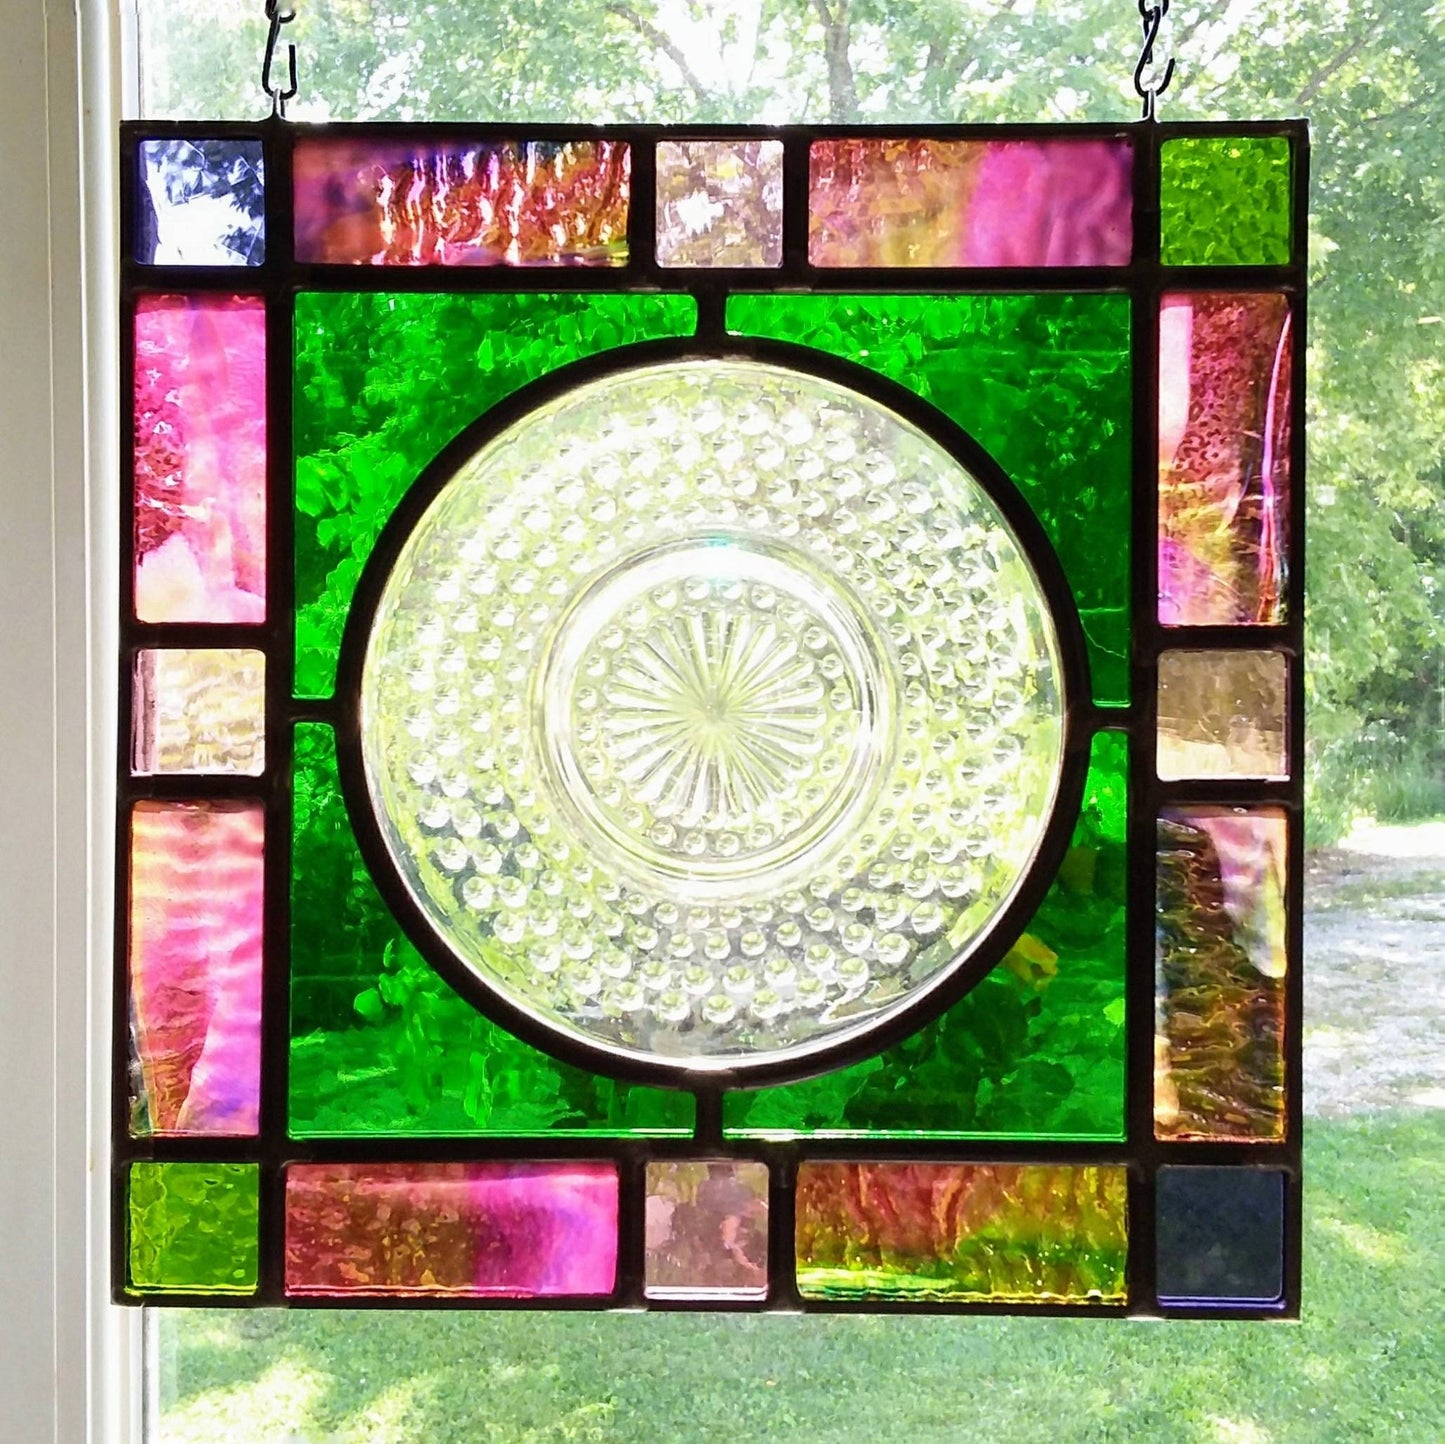 Pink Stained Glass Window Hob Nail Saucer/Depression Era vintage plate, displayed in traditional lead came 10"×10" includes gift wrap